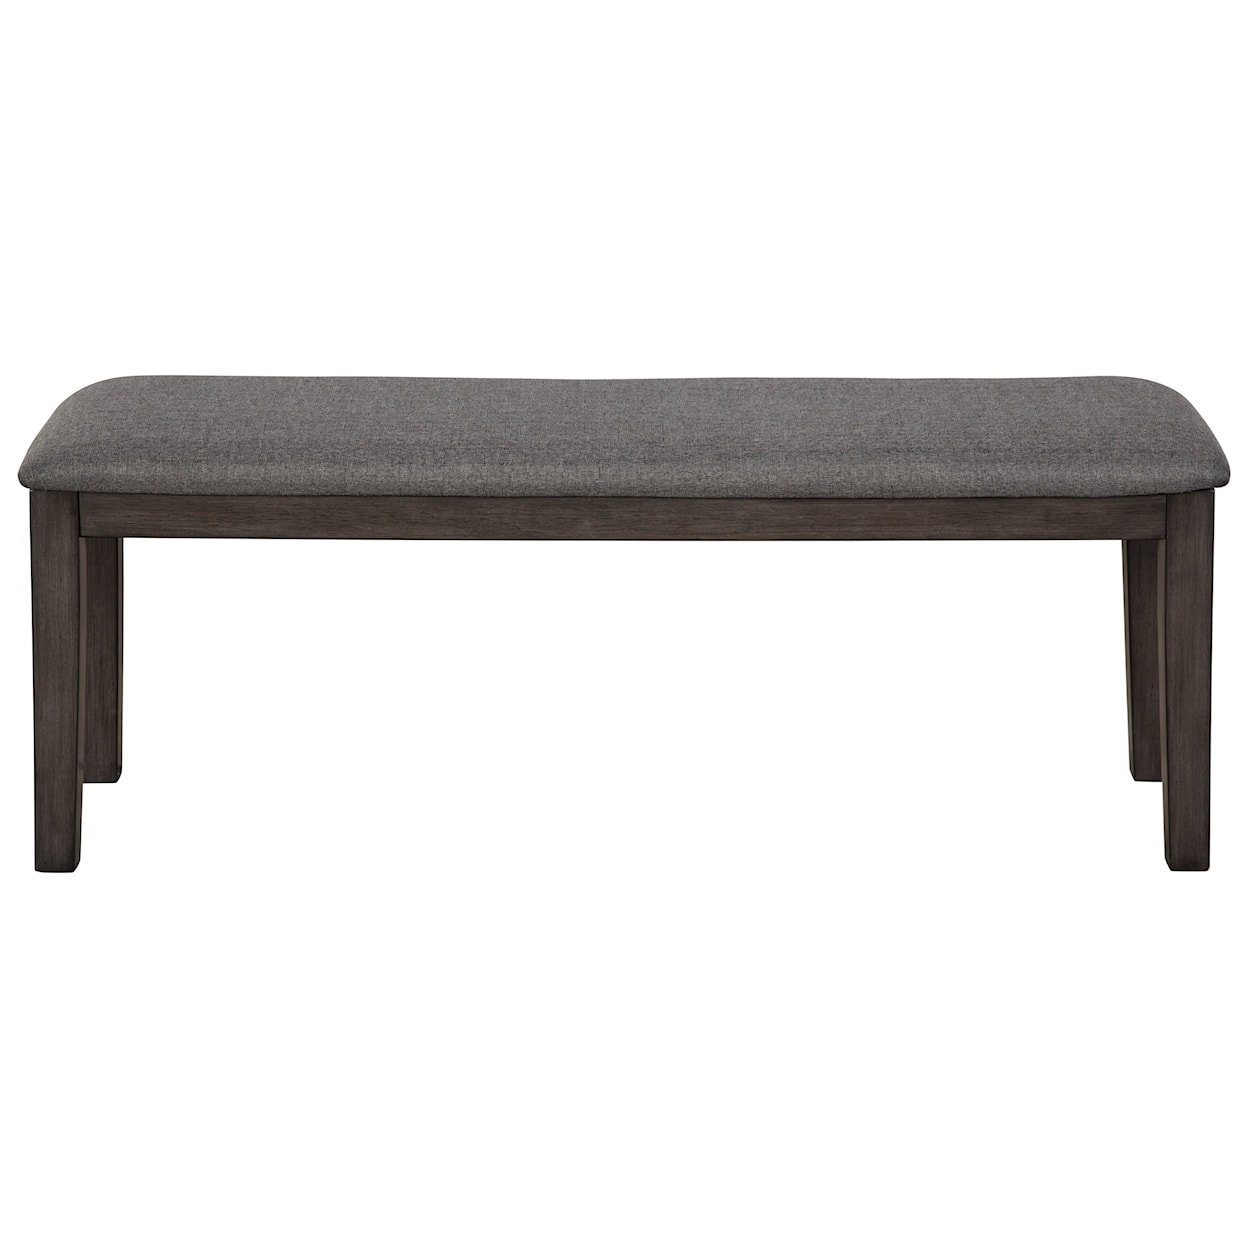 Benchcraft Luvoni Upholstered Bench